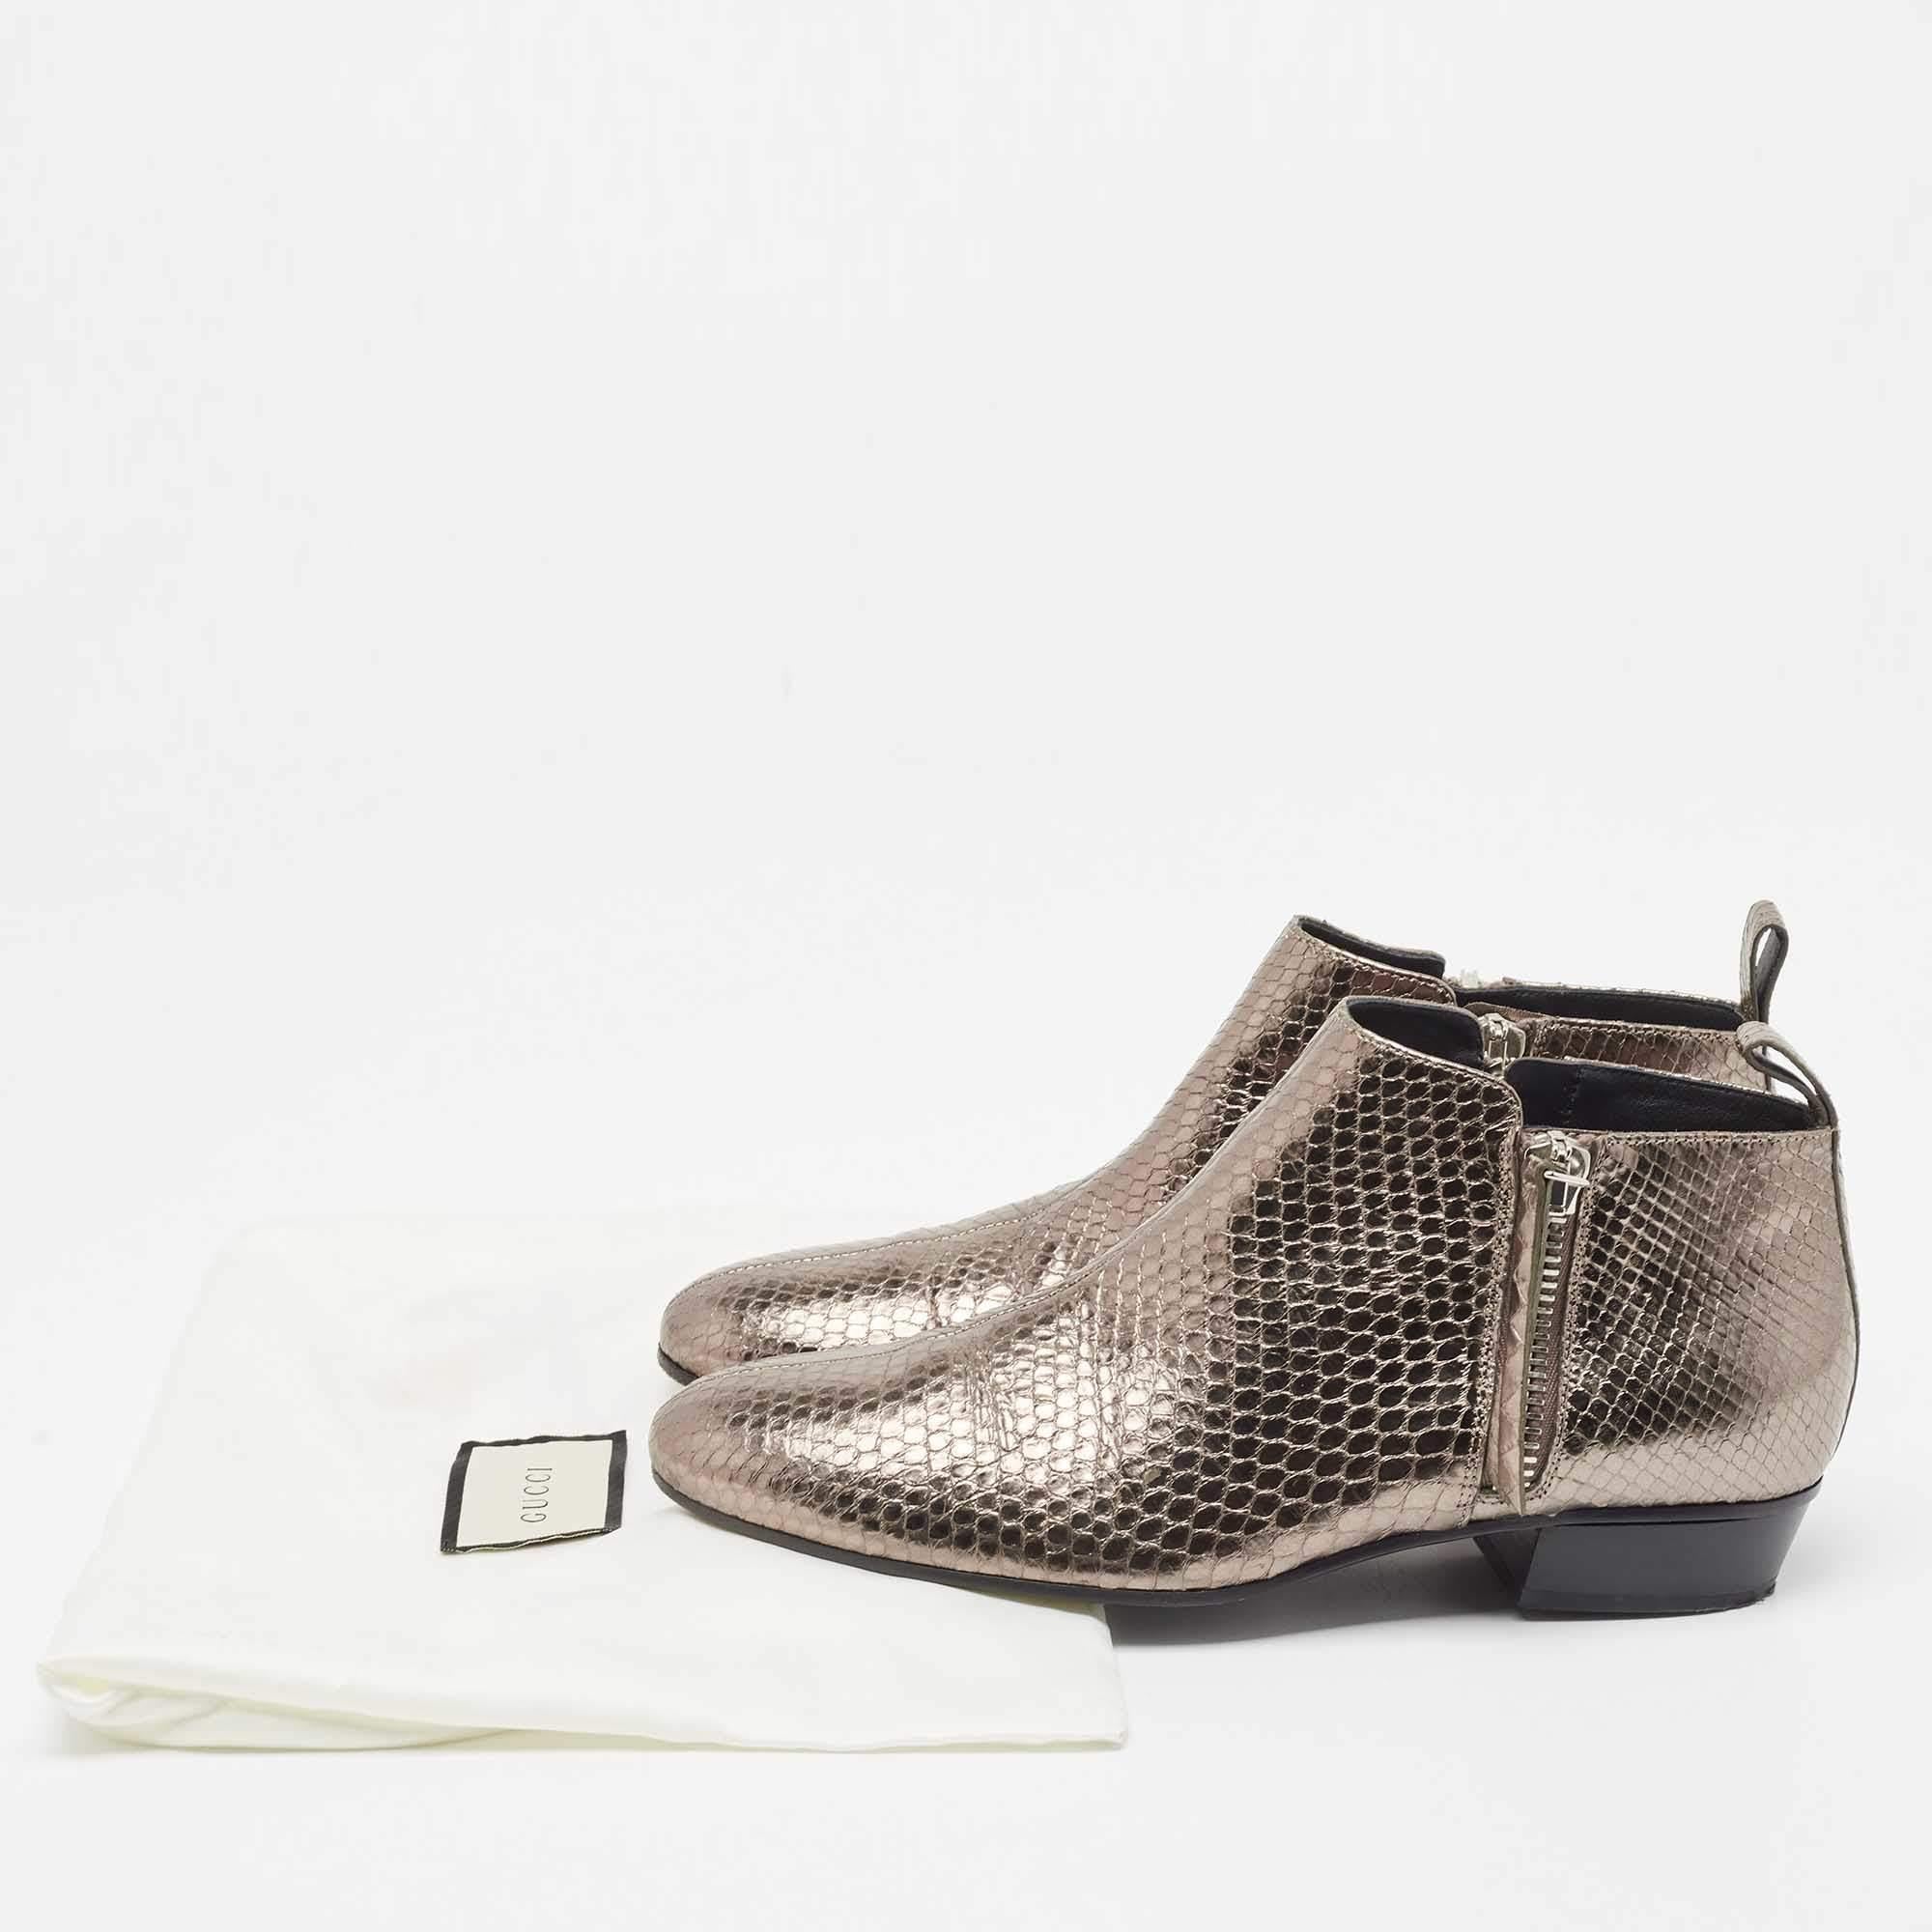  Gucci Metallic Embossed Python Ankle Boots Size 37 For Sale 4